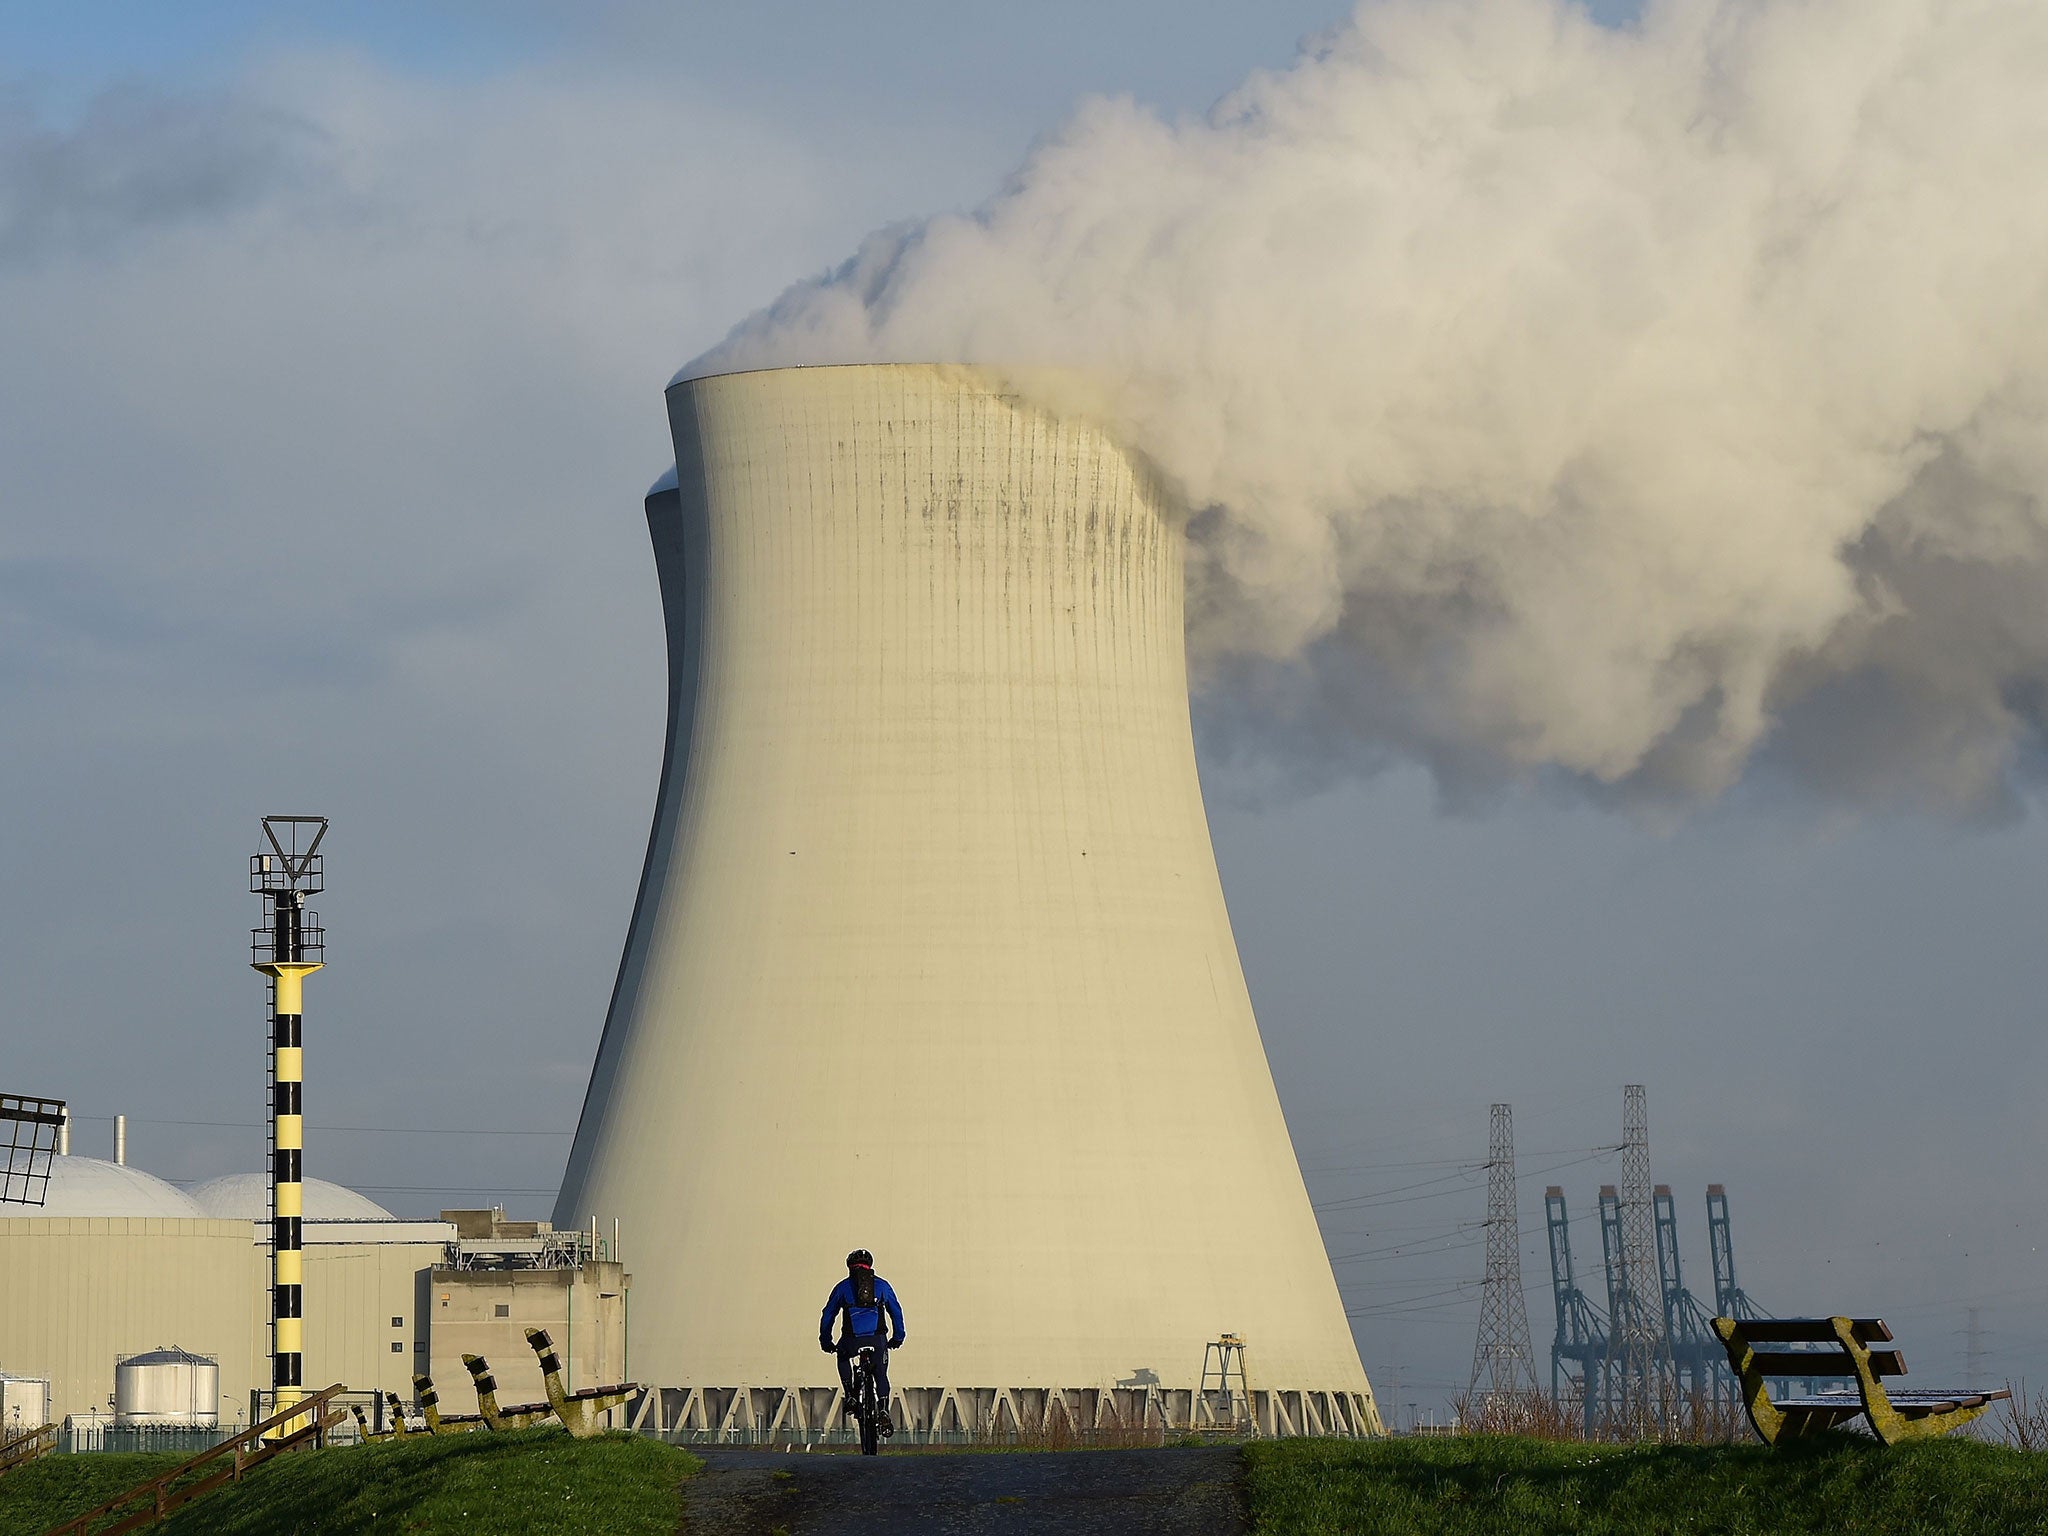 A Belgian nuclear plant was partially evacuated amid concerns after the Brussels attacks